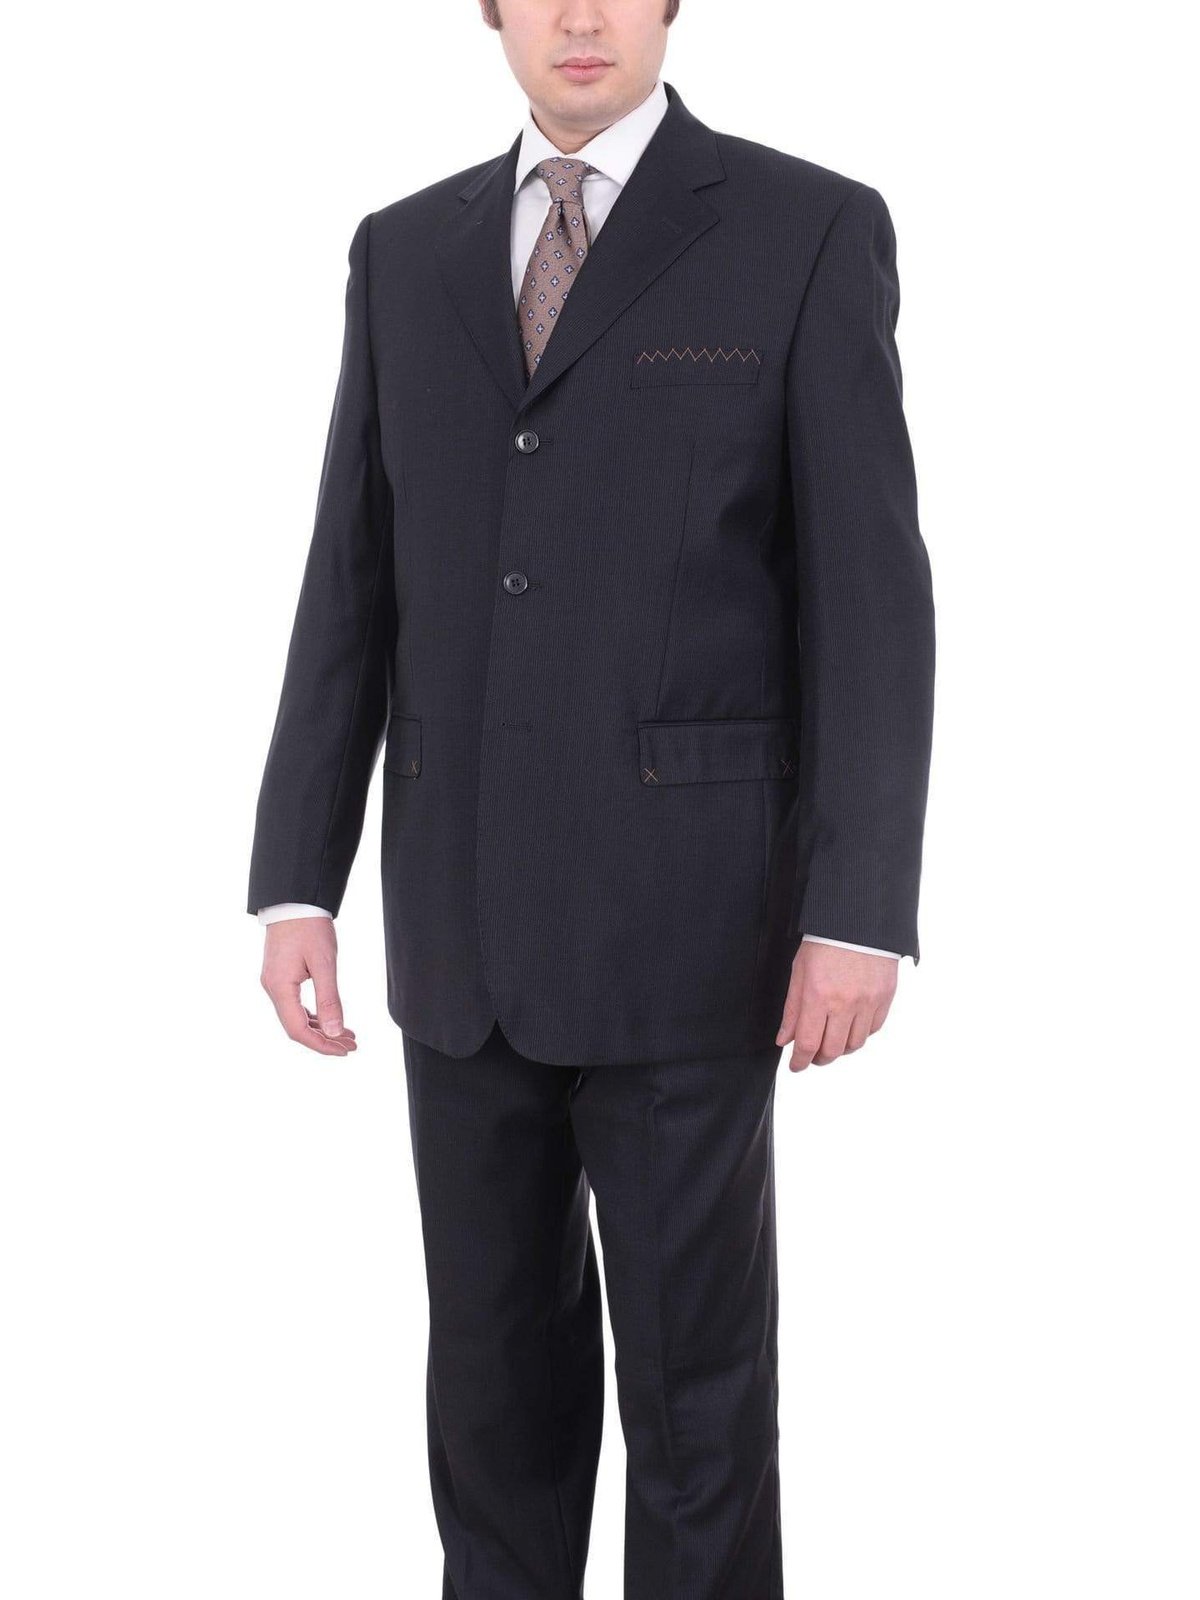 Carlo Palazzi Sale Suits 42S Mens Italy Classic Fit Navy Blue 3 Button Pleated 100% Wool Suit